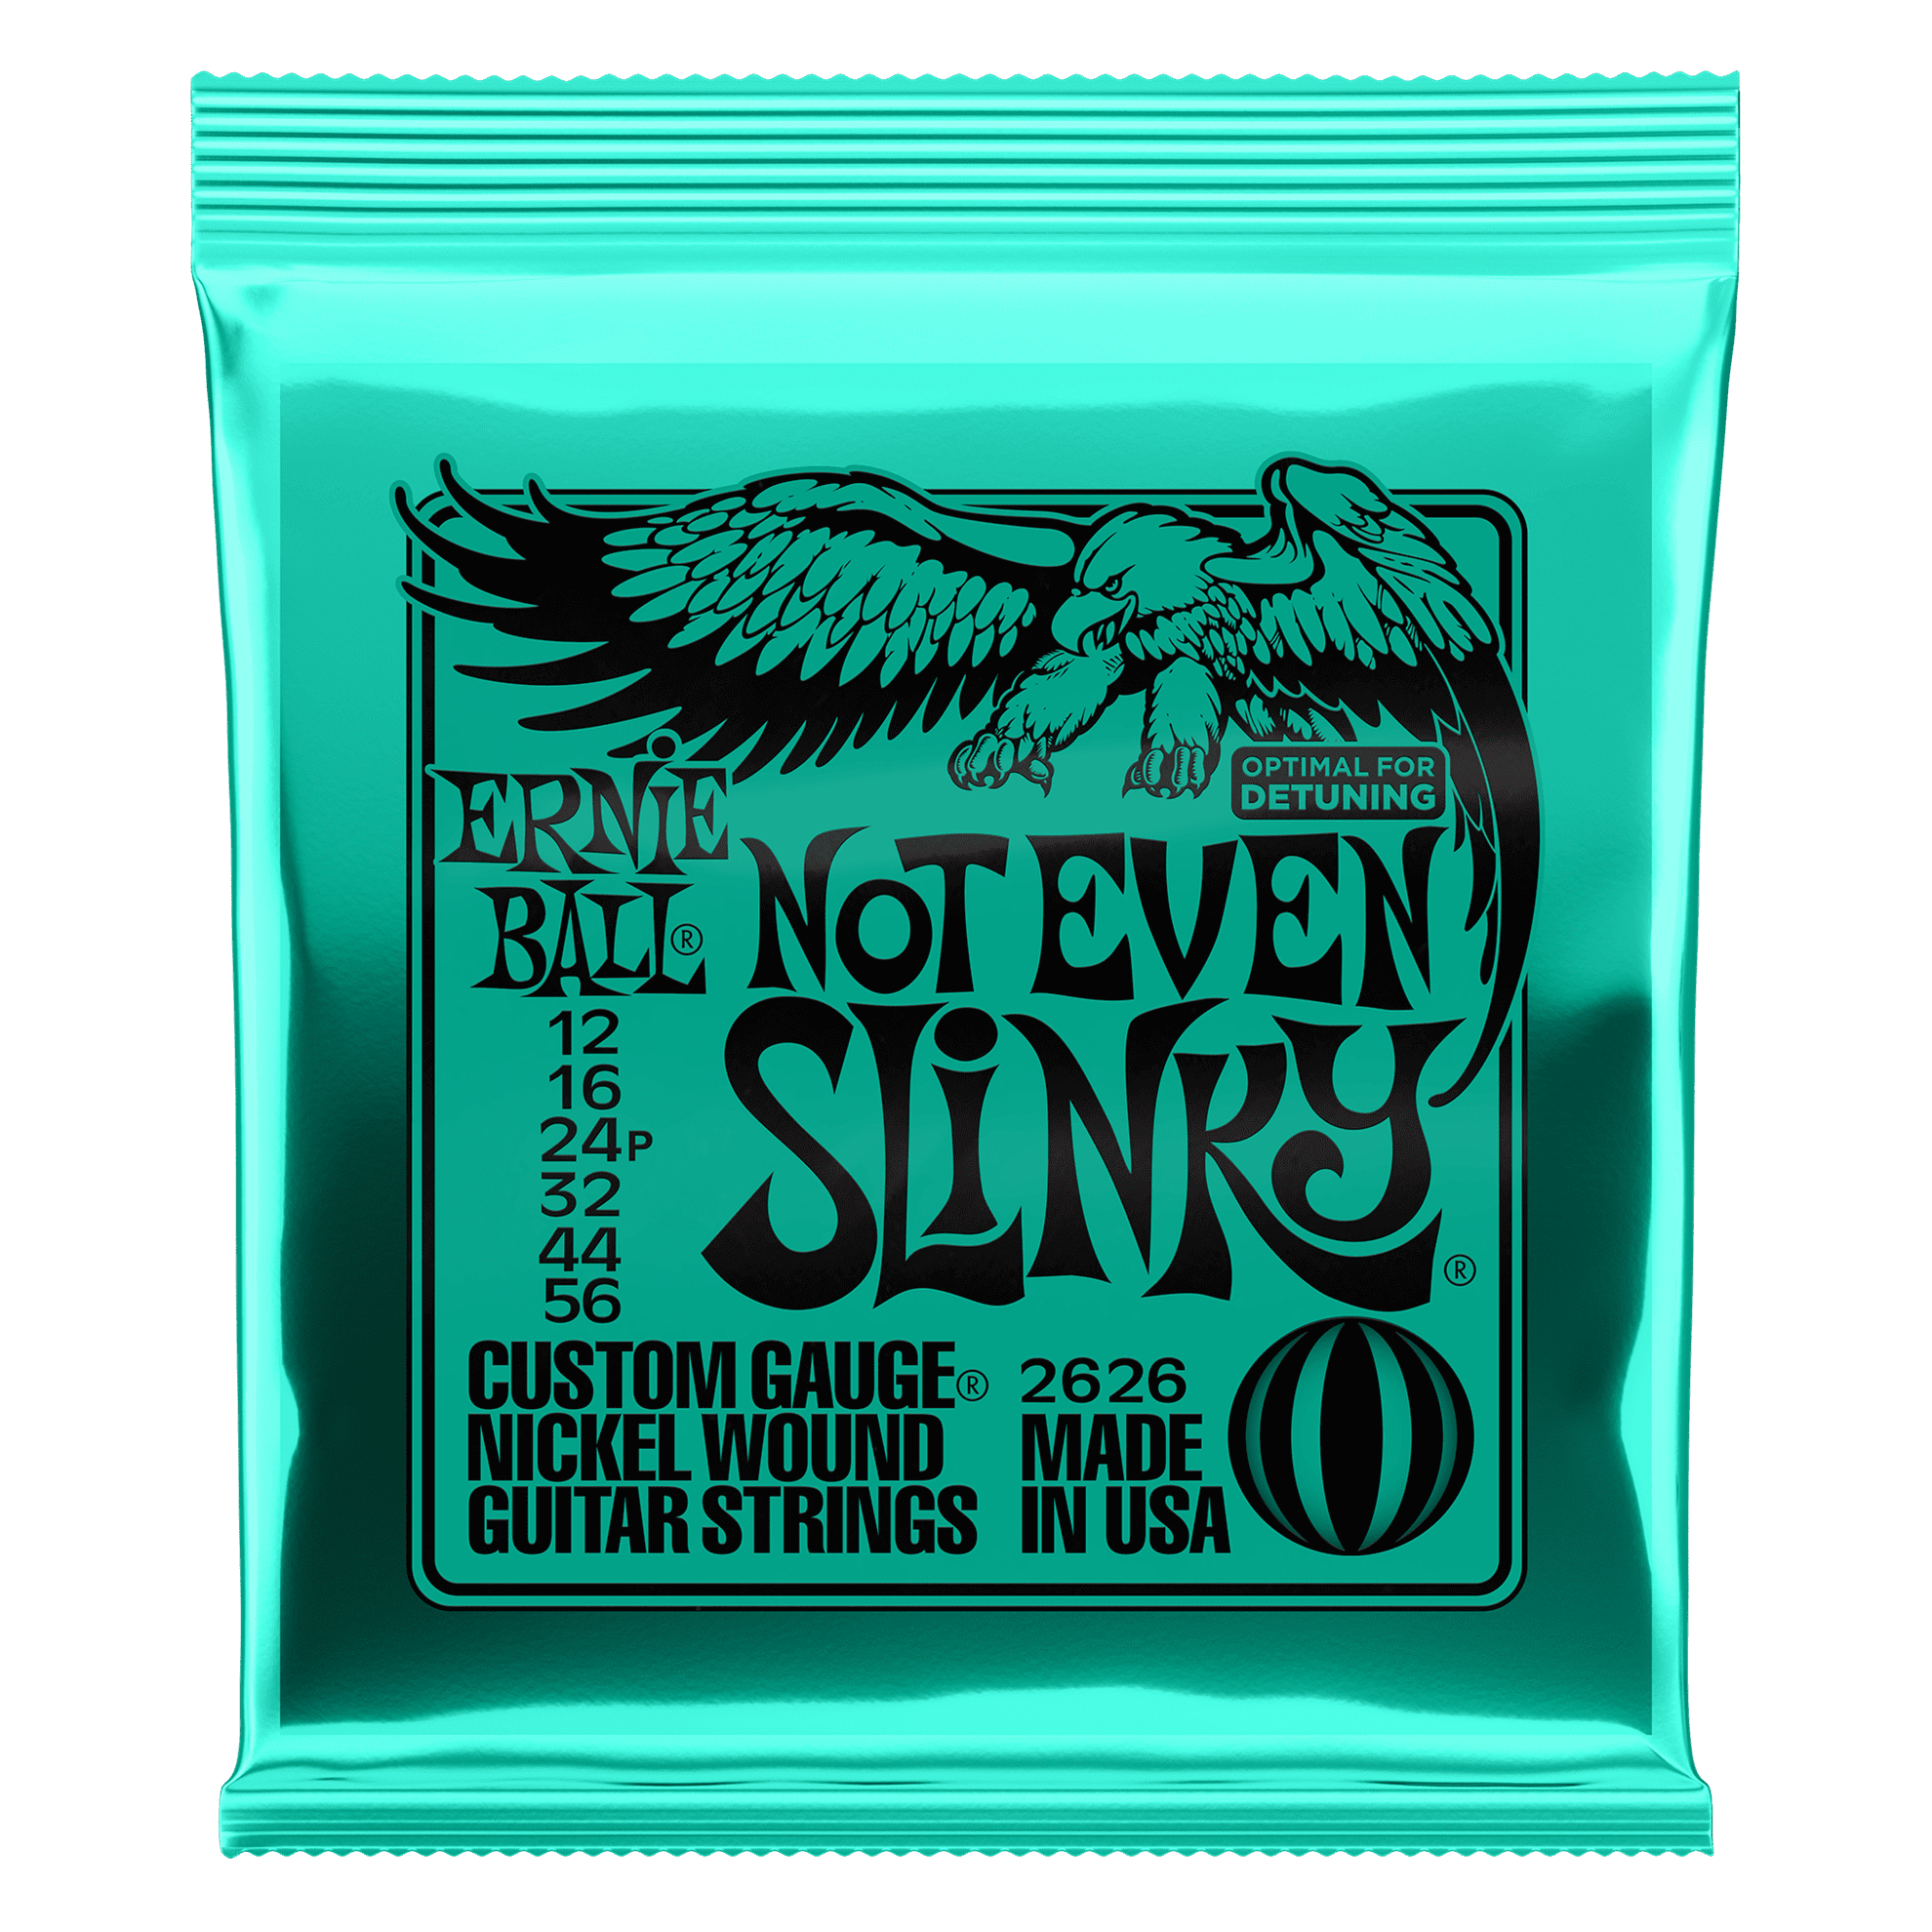 https://www.reinzoo.it/wp-content/uploads/2020/10/0013673_ernie-ball-2626-not-even-slinky-nickel-wound-electric-guitar-strings.png